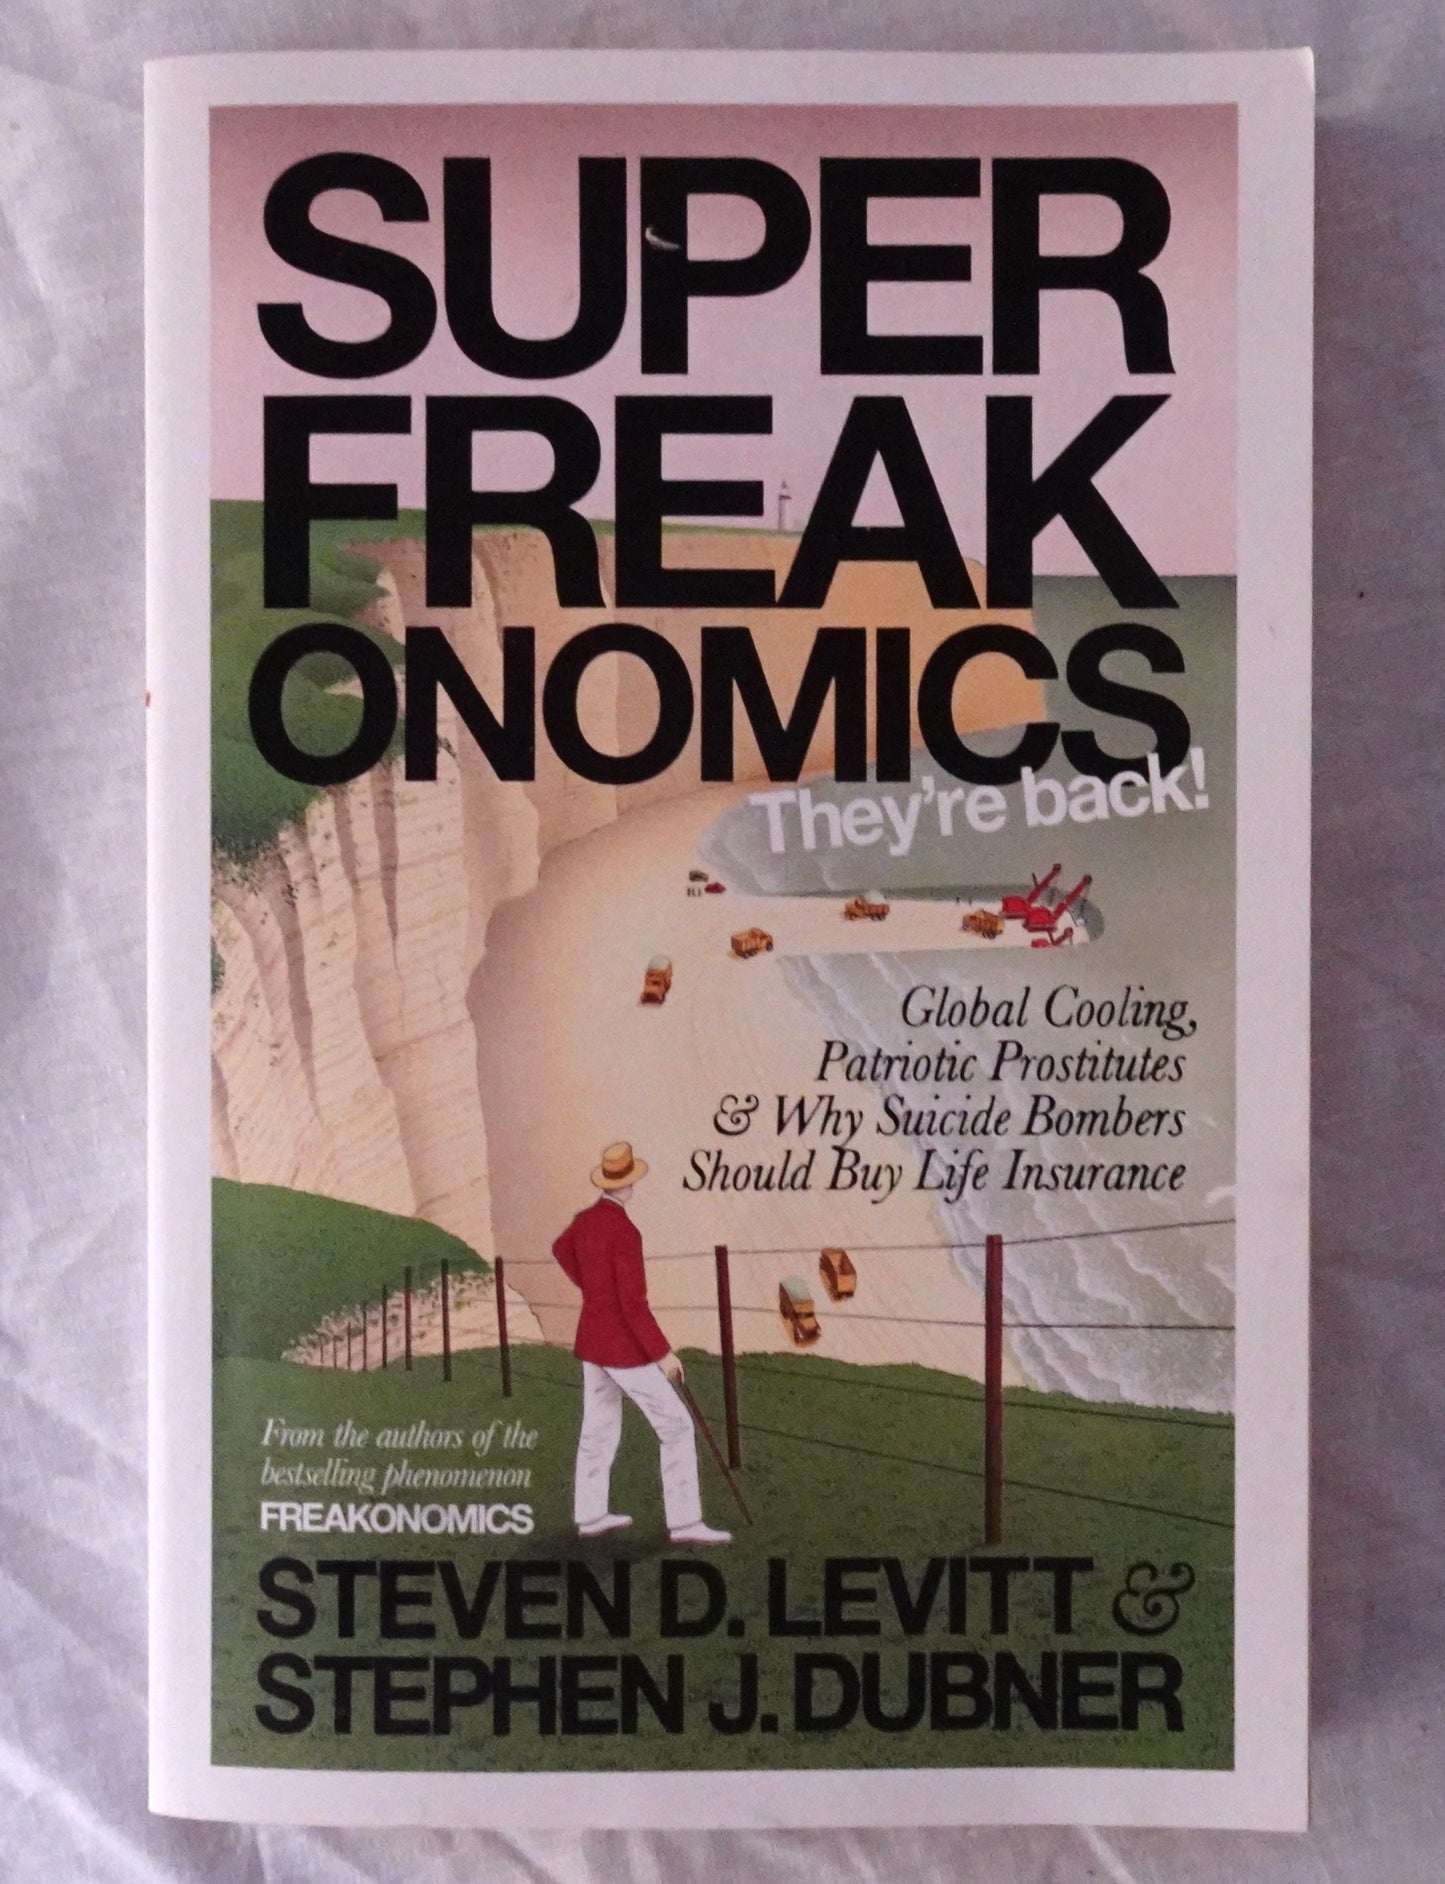 Superfreakonomics  Global cooling, patriotic prostitutes, and why suicide bombers should buy life insurance  by Steven D. Levitt & Stephen J. Dubner